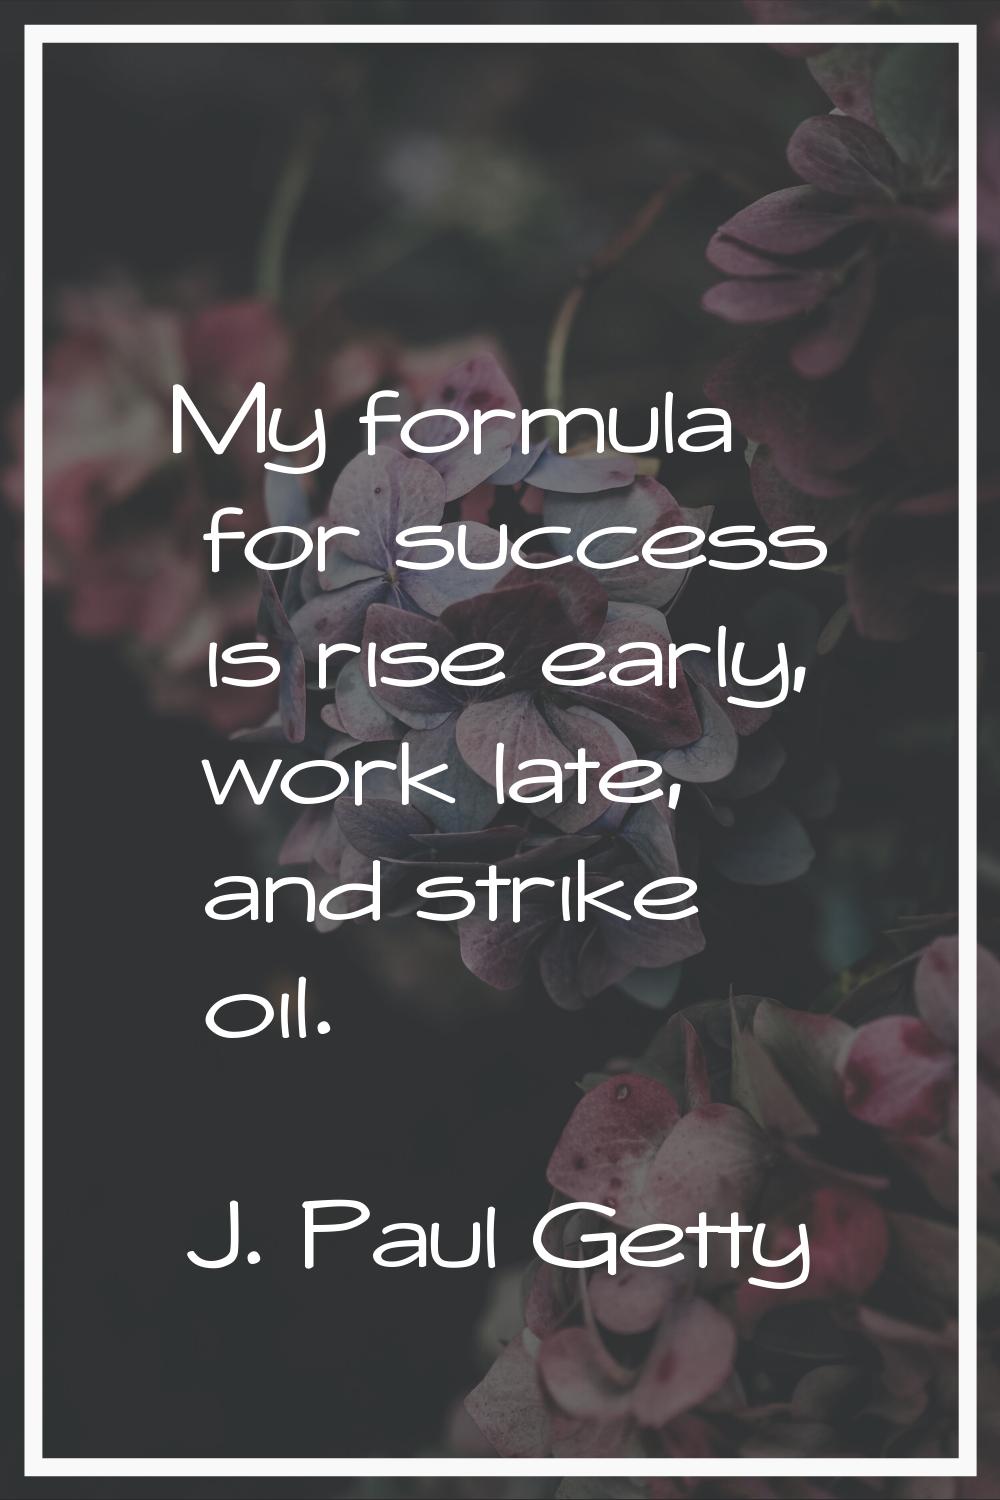 My formula for success is rise early, work late, and strike oil.